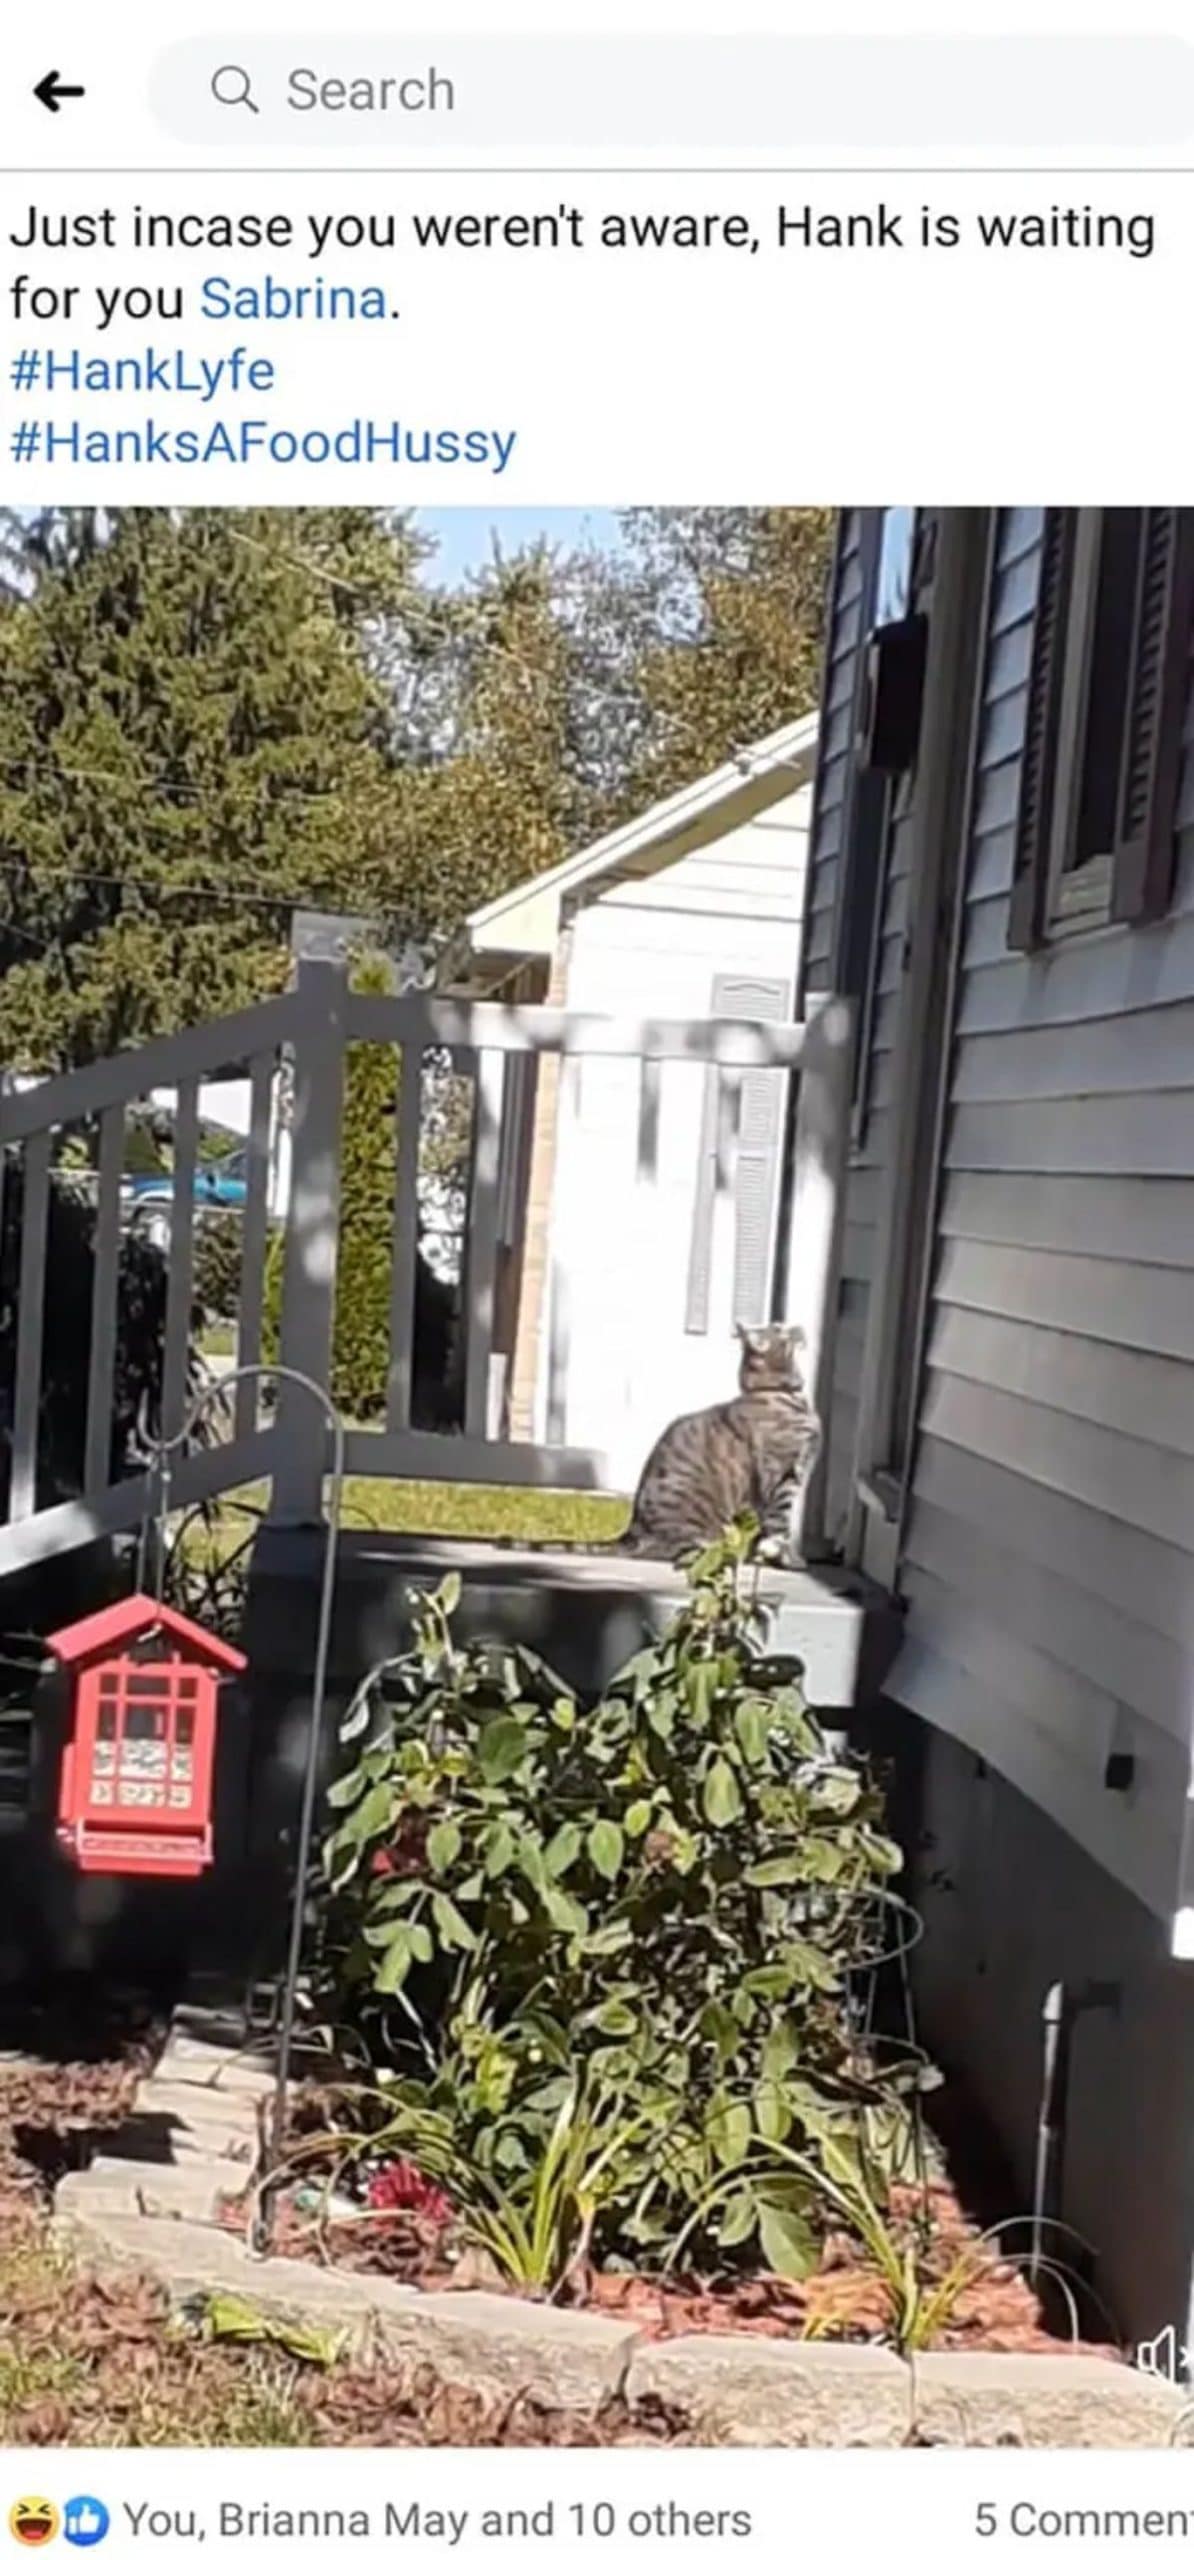 facebook post showing a photo with a grey tabby cat sitting on a porch looking up at the door and the caption says that the cat named Hank is waiting for the owner